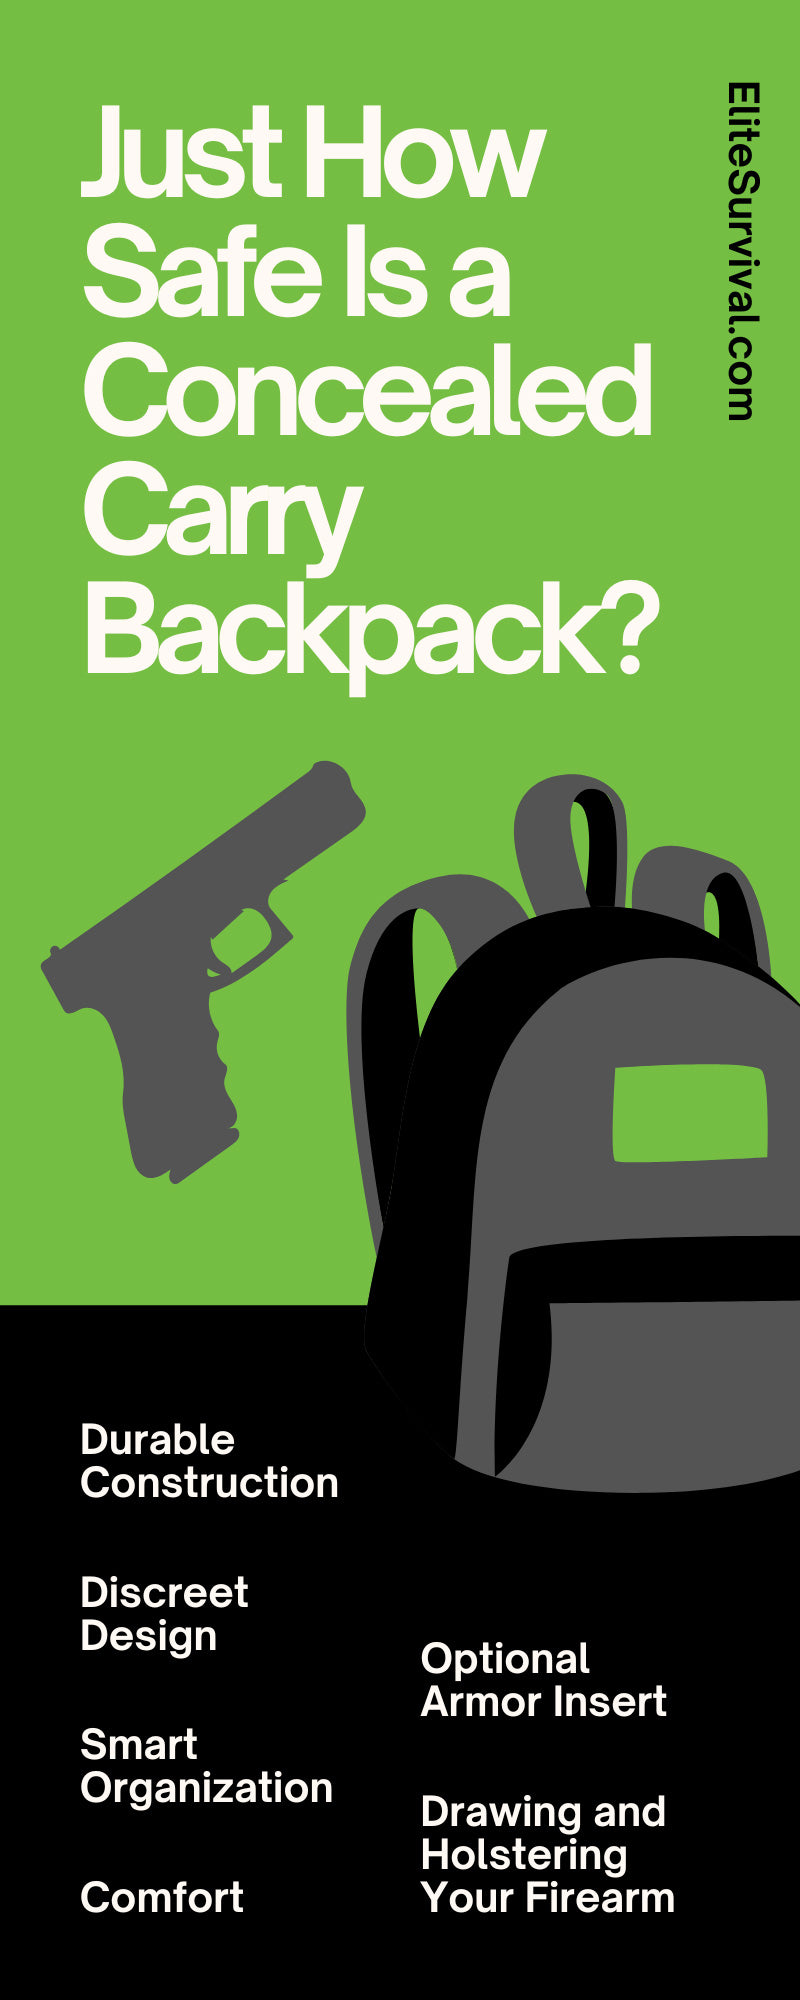 Just How Safe Is a Concealed Carry Backpack?